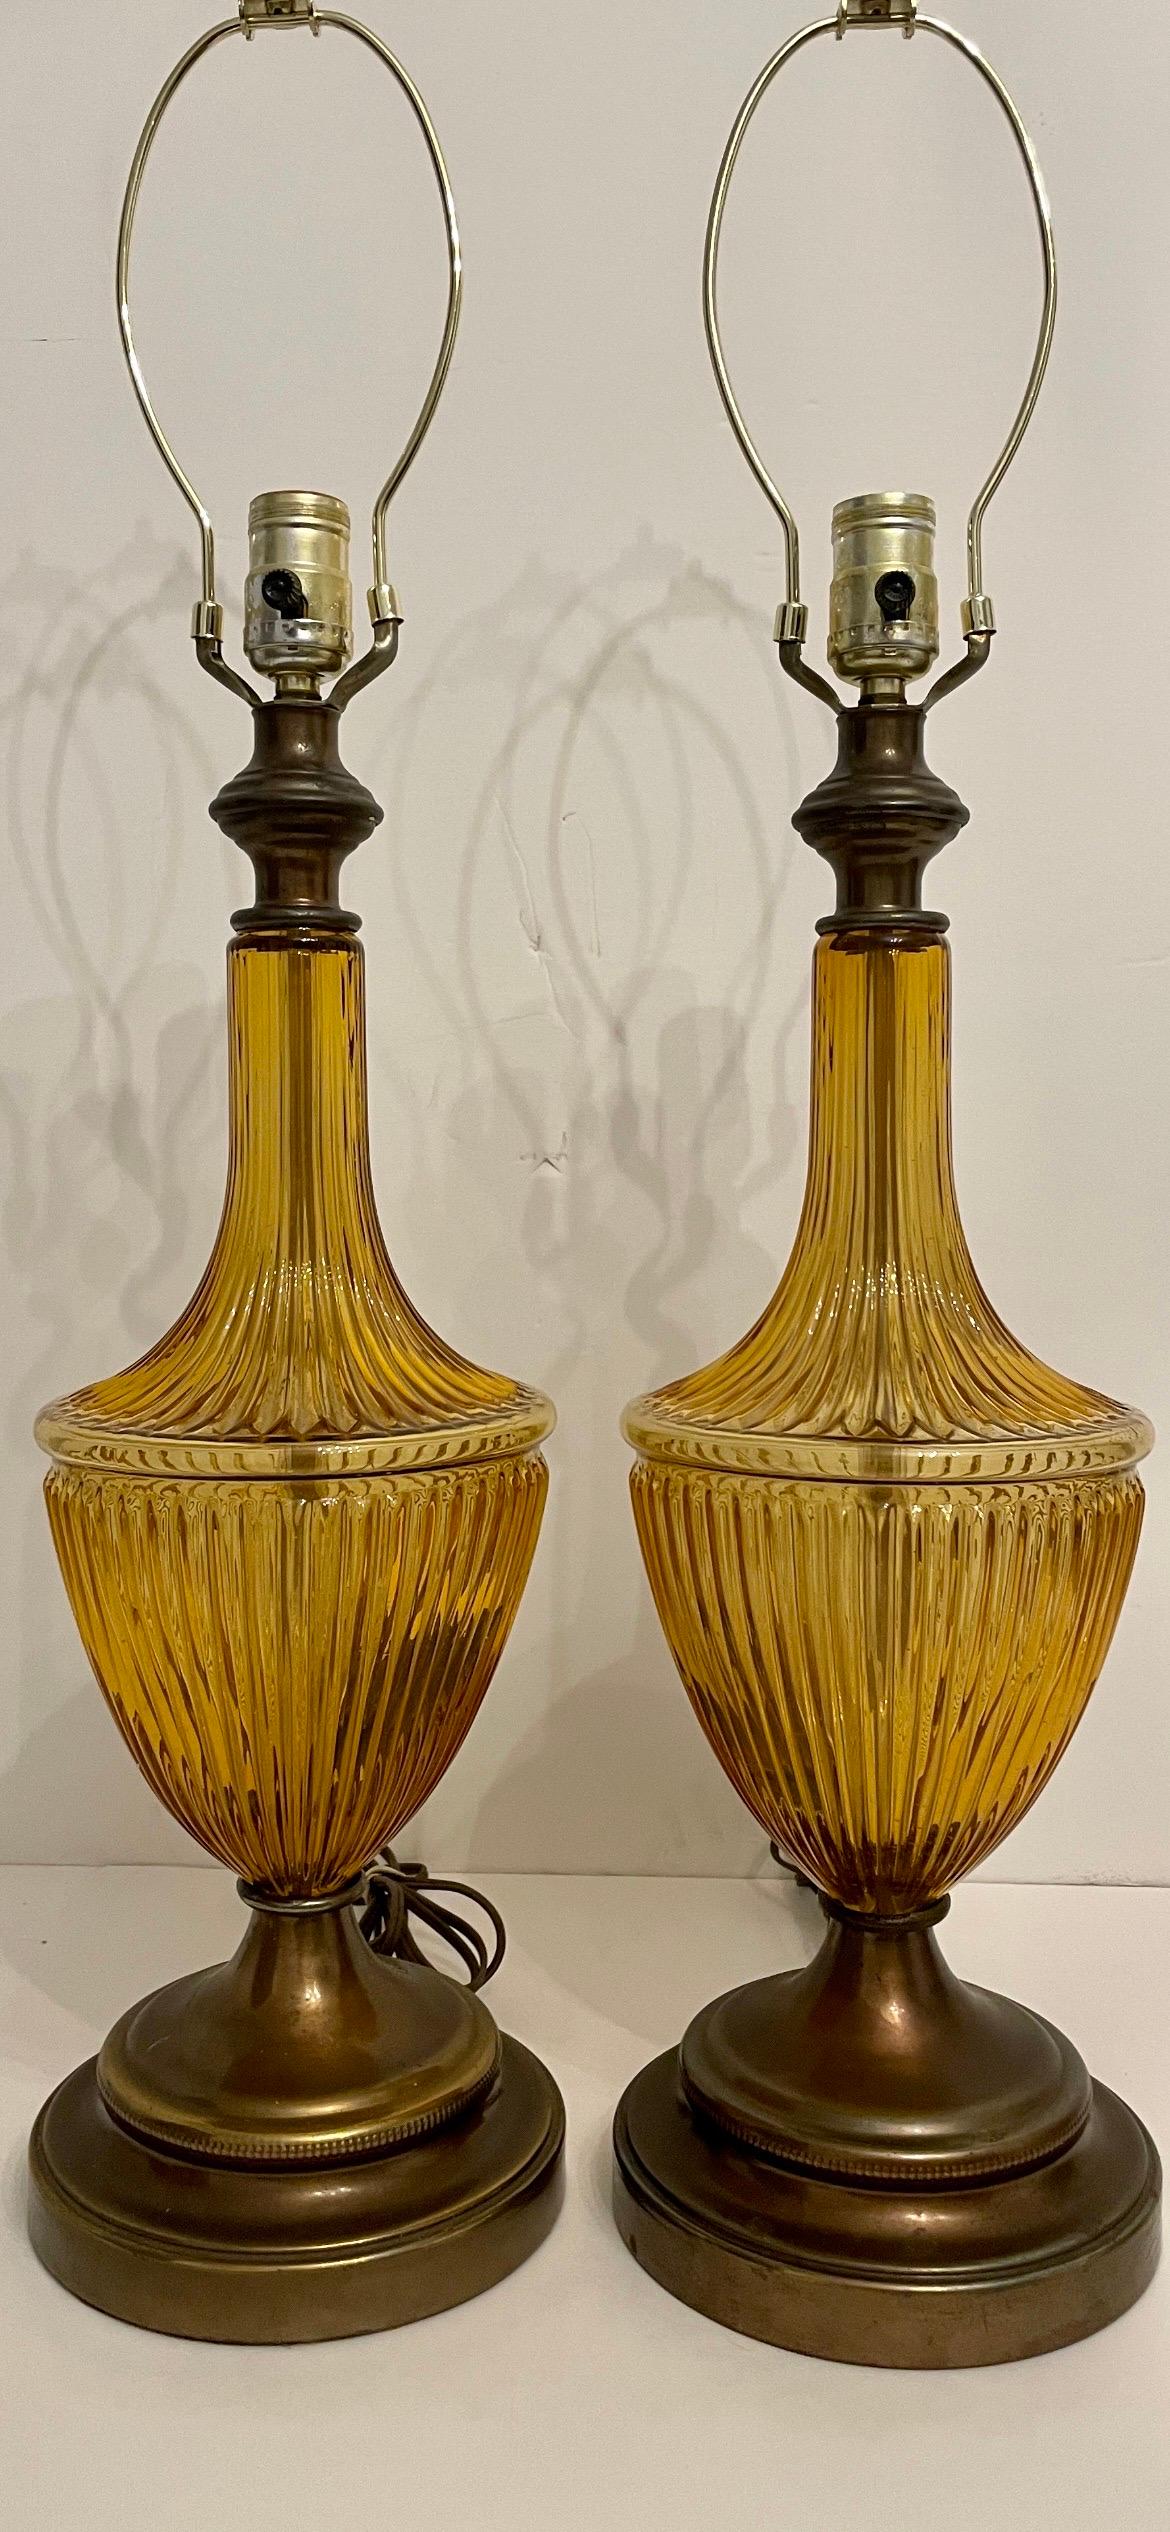 Pair Mid Century Amber glass lamps. Urn form ribbed amber glass with antique brass base and fittings. Any dark spots in glass is reflection or shadow. Bases have slight patina spots. 7